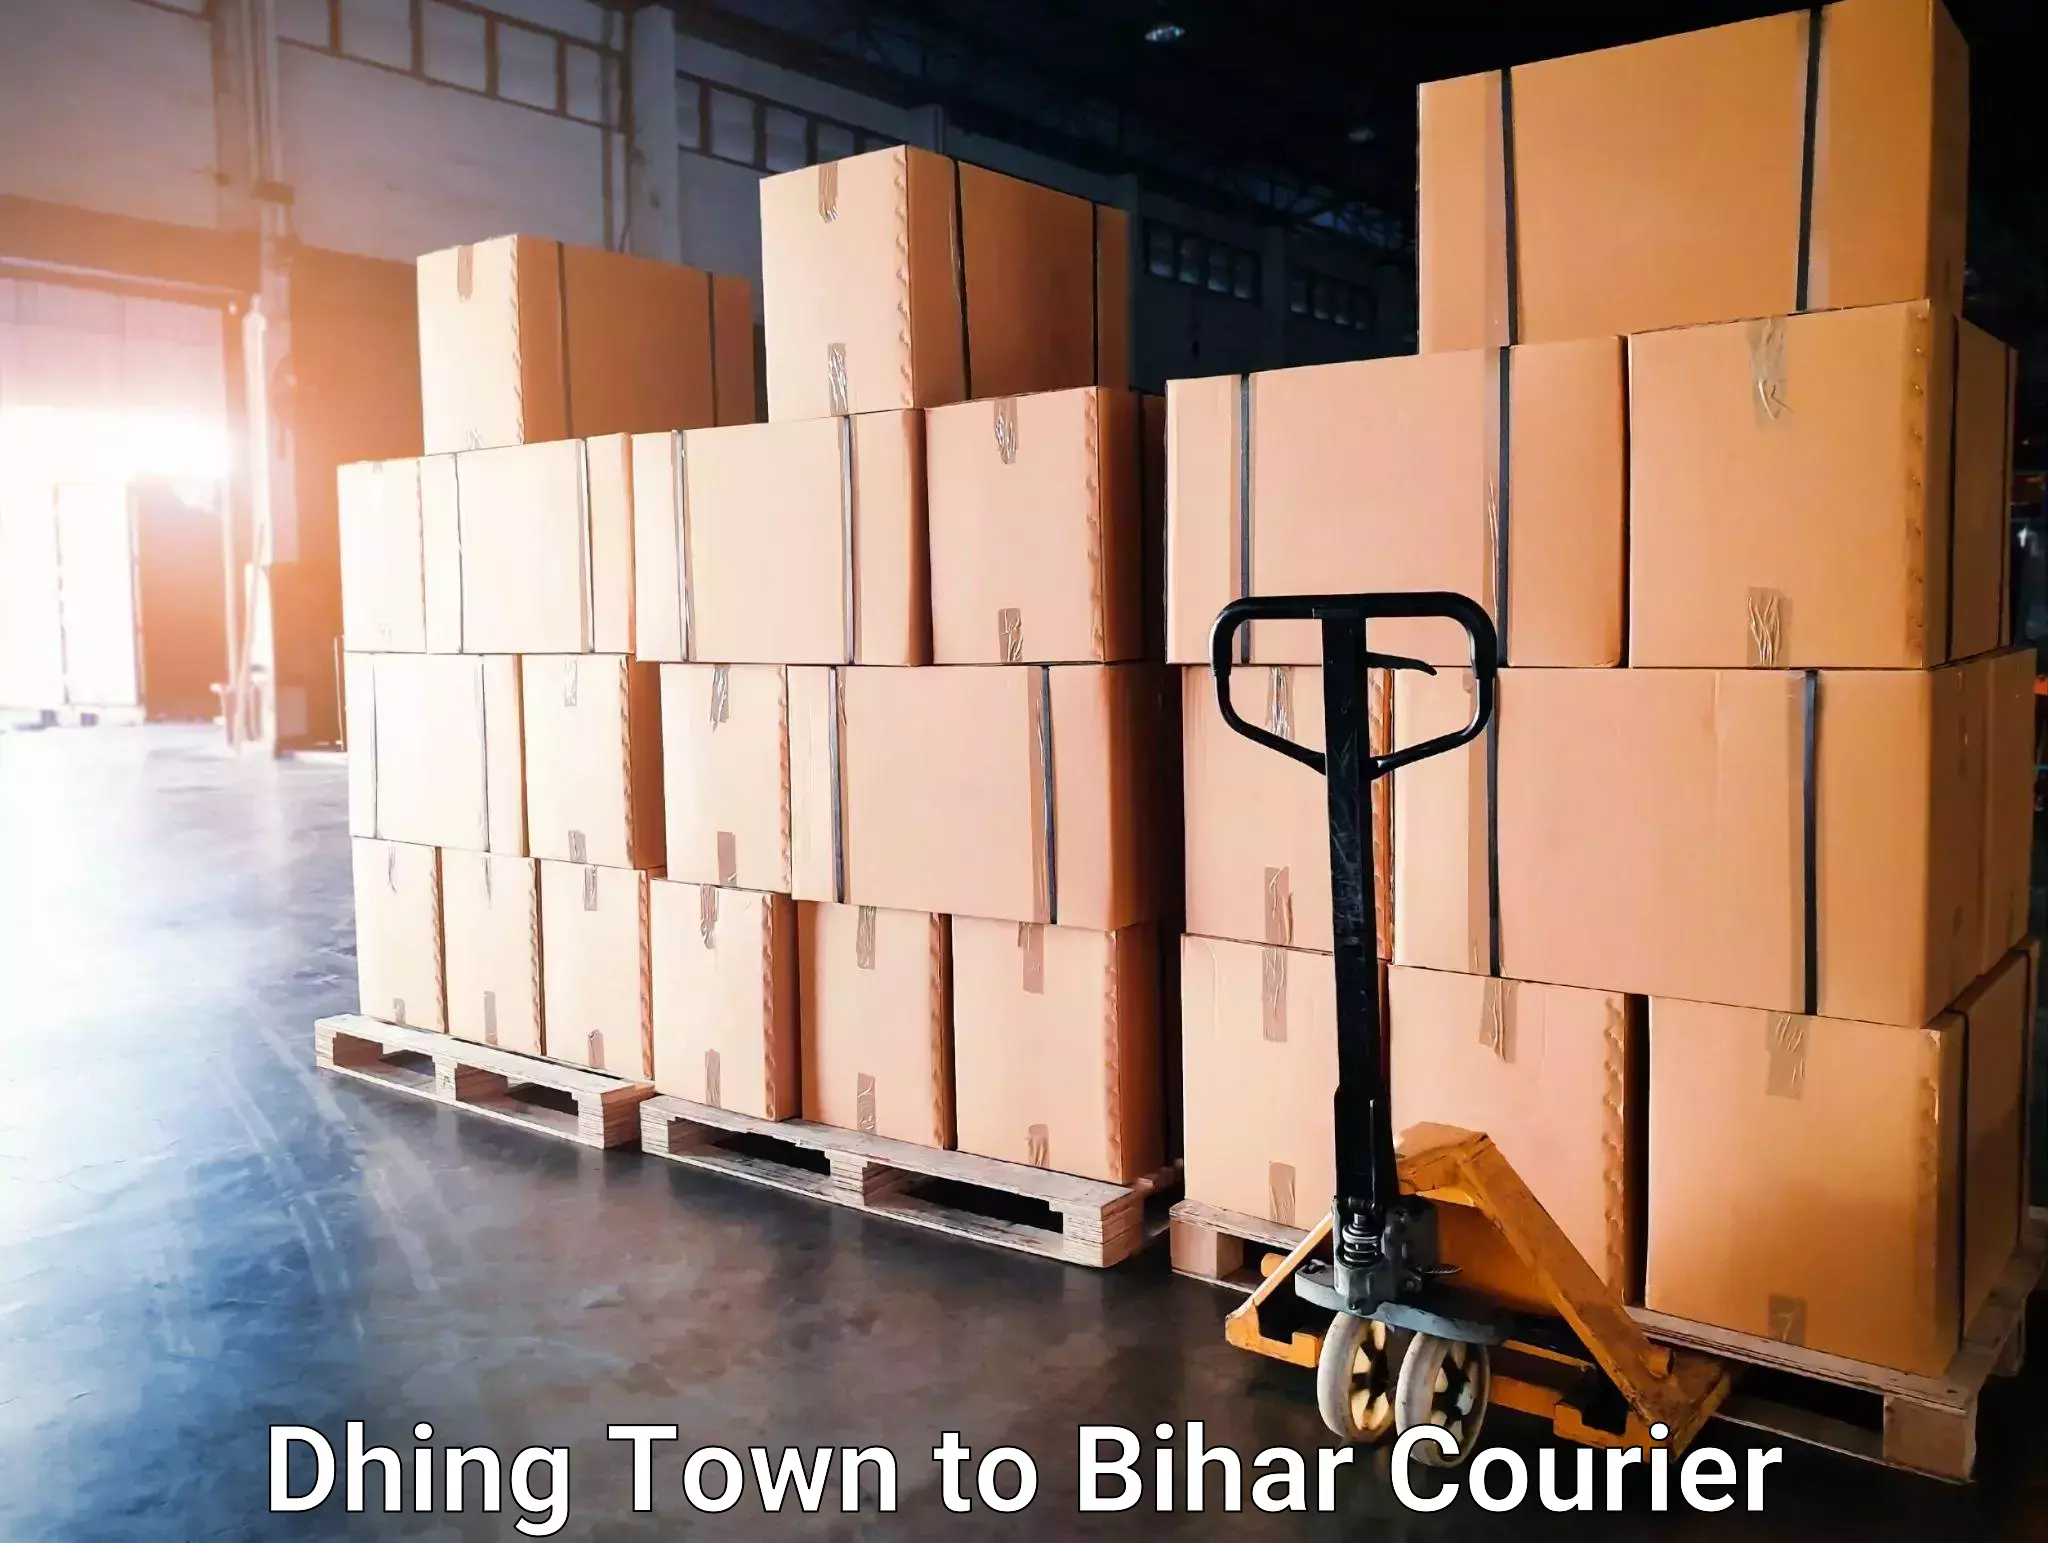 Business delivery service Dhing Town to Bihar